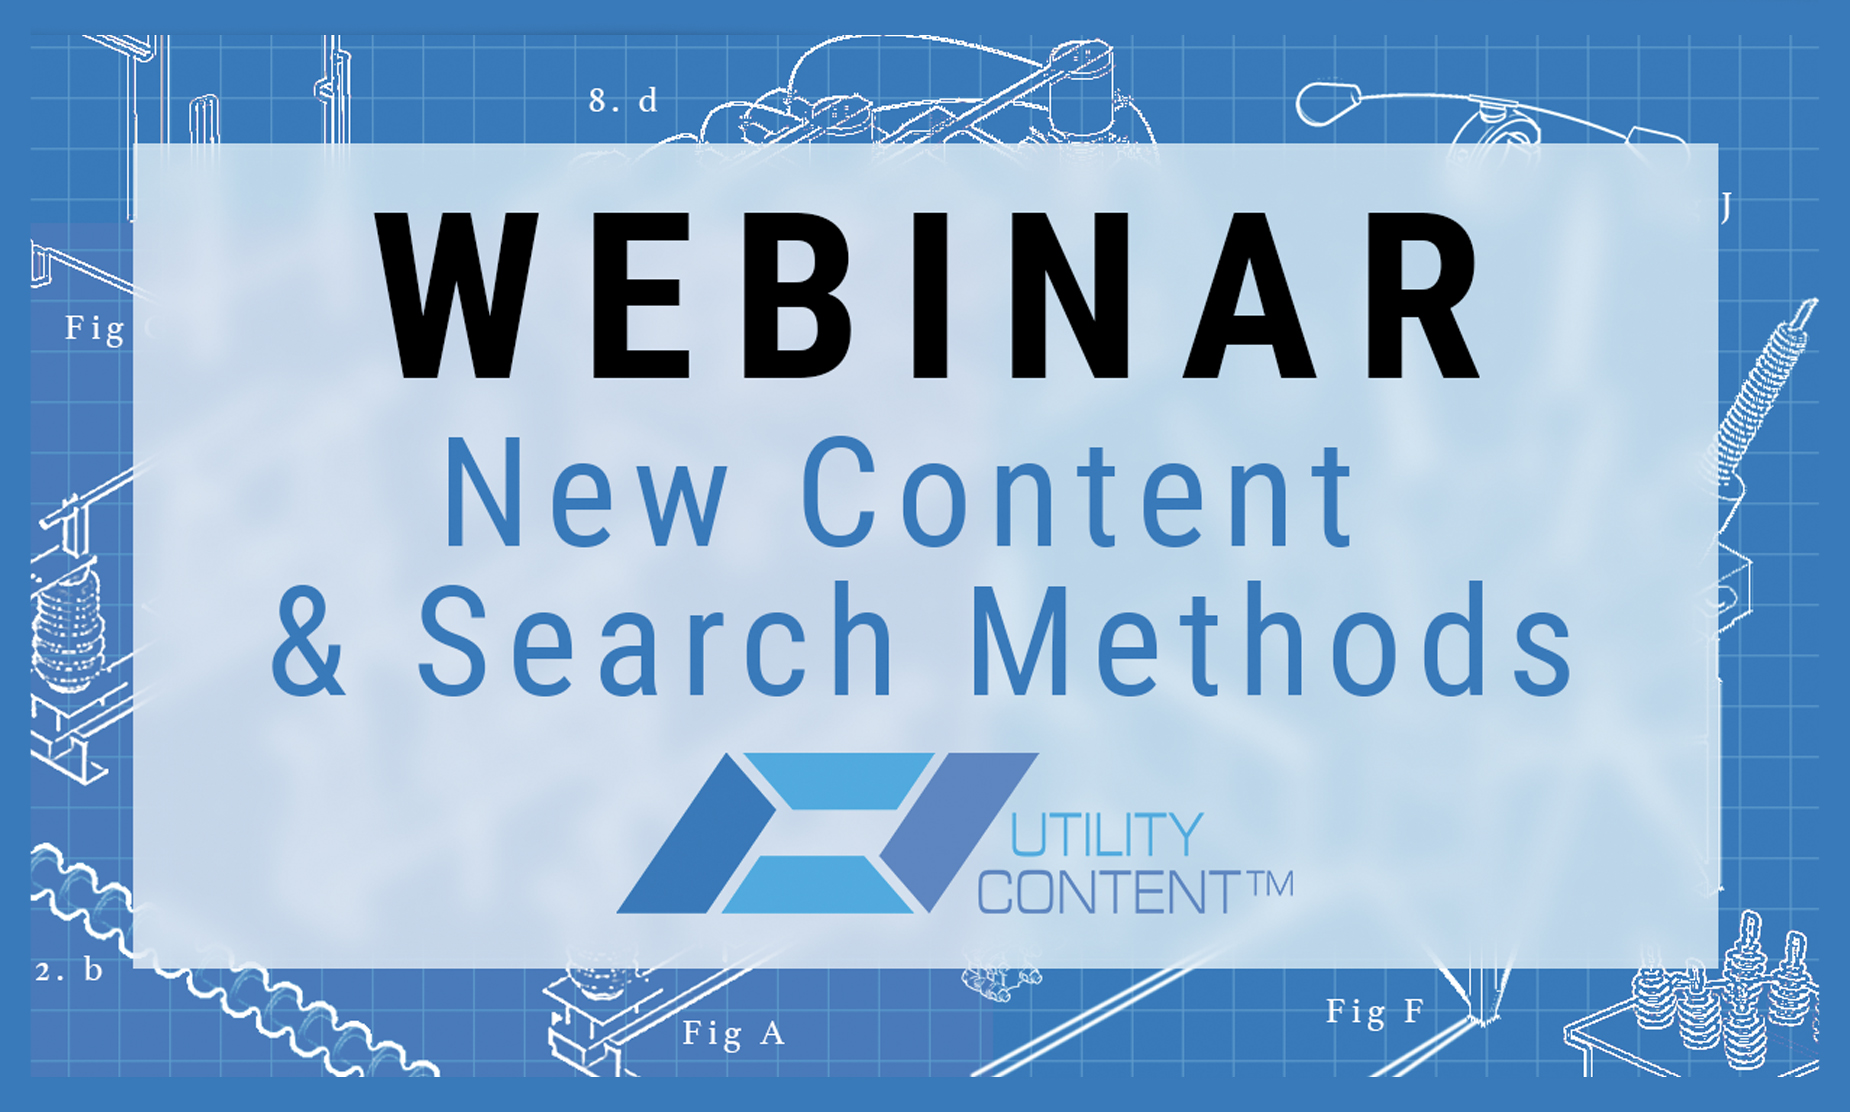 Webinar on Utility Content